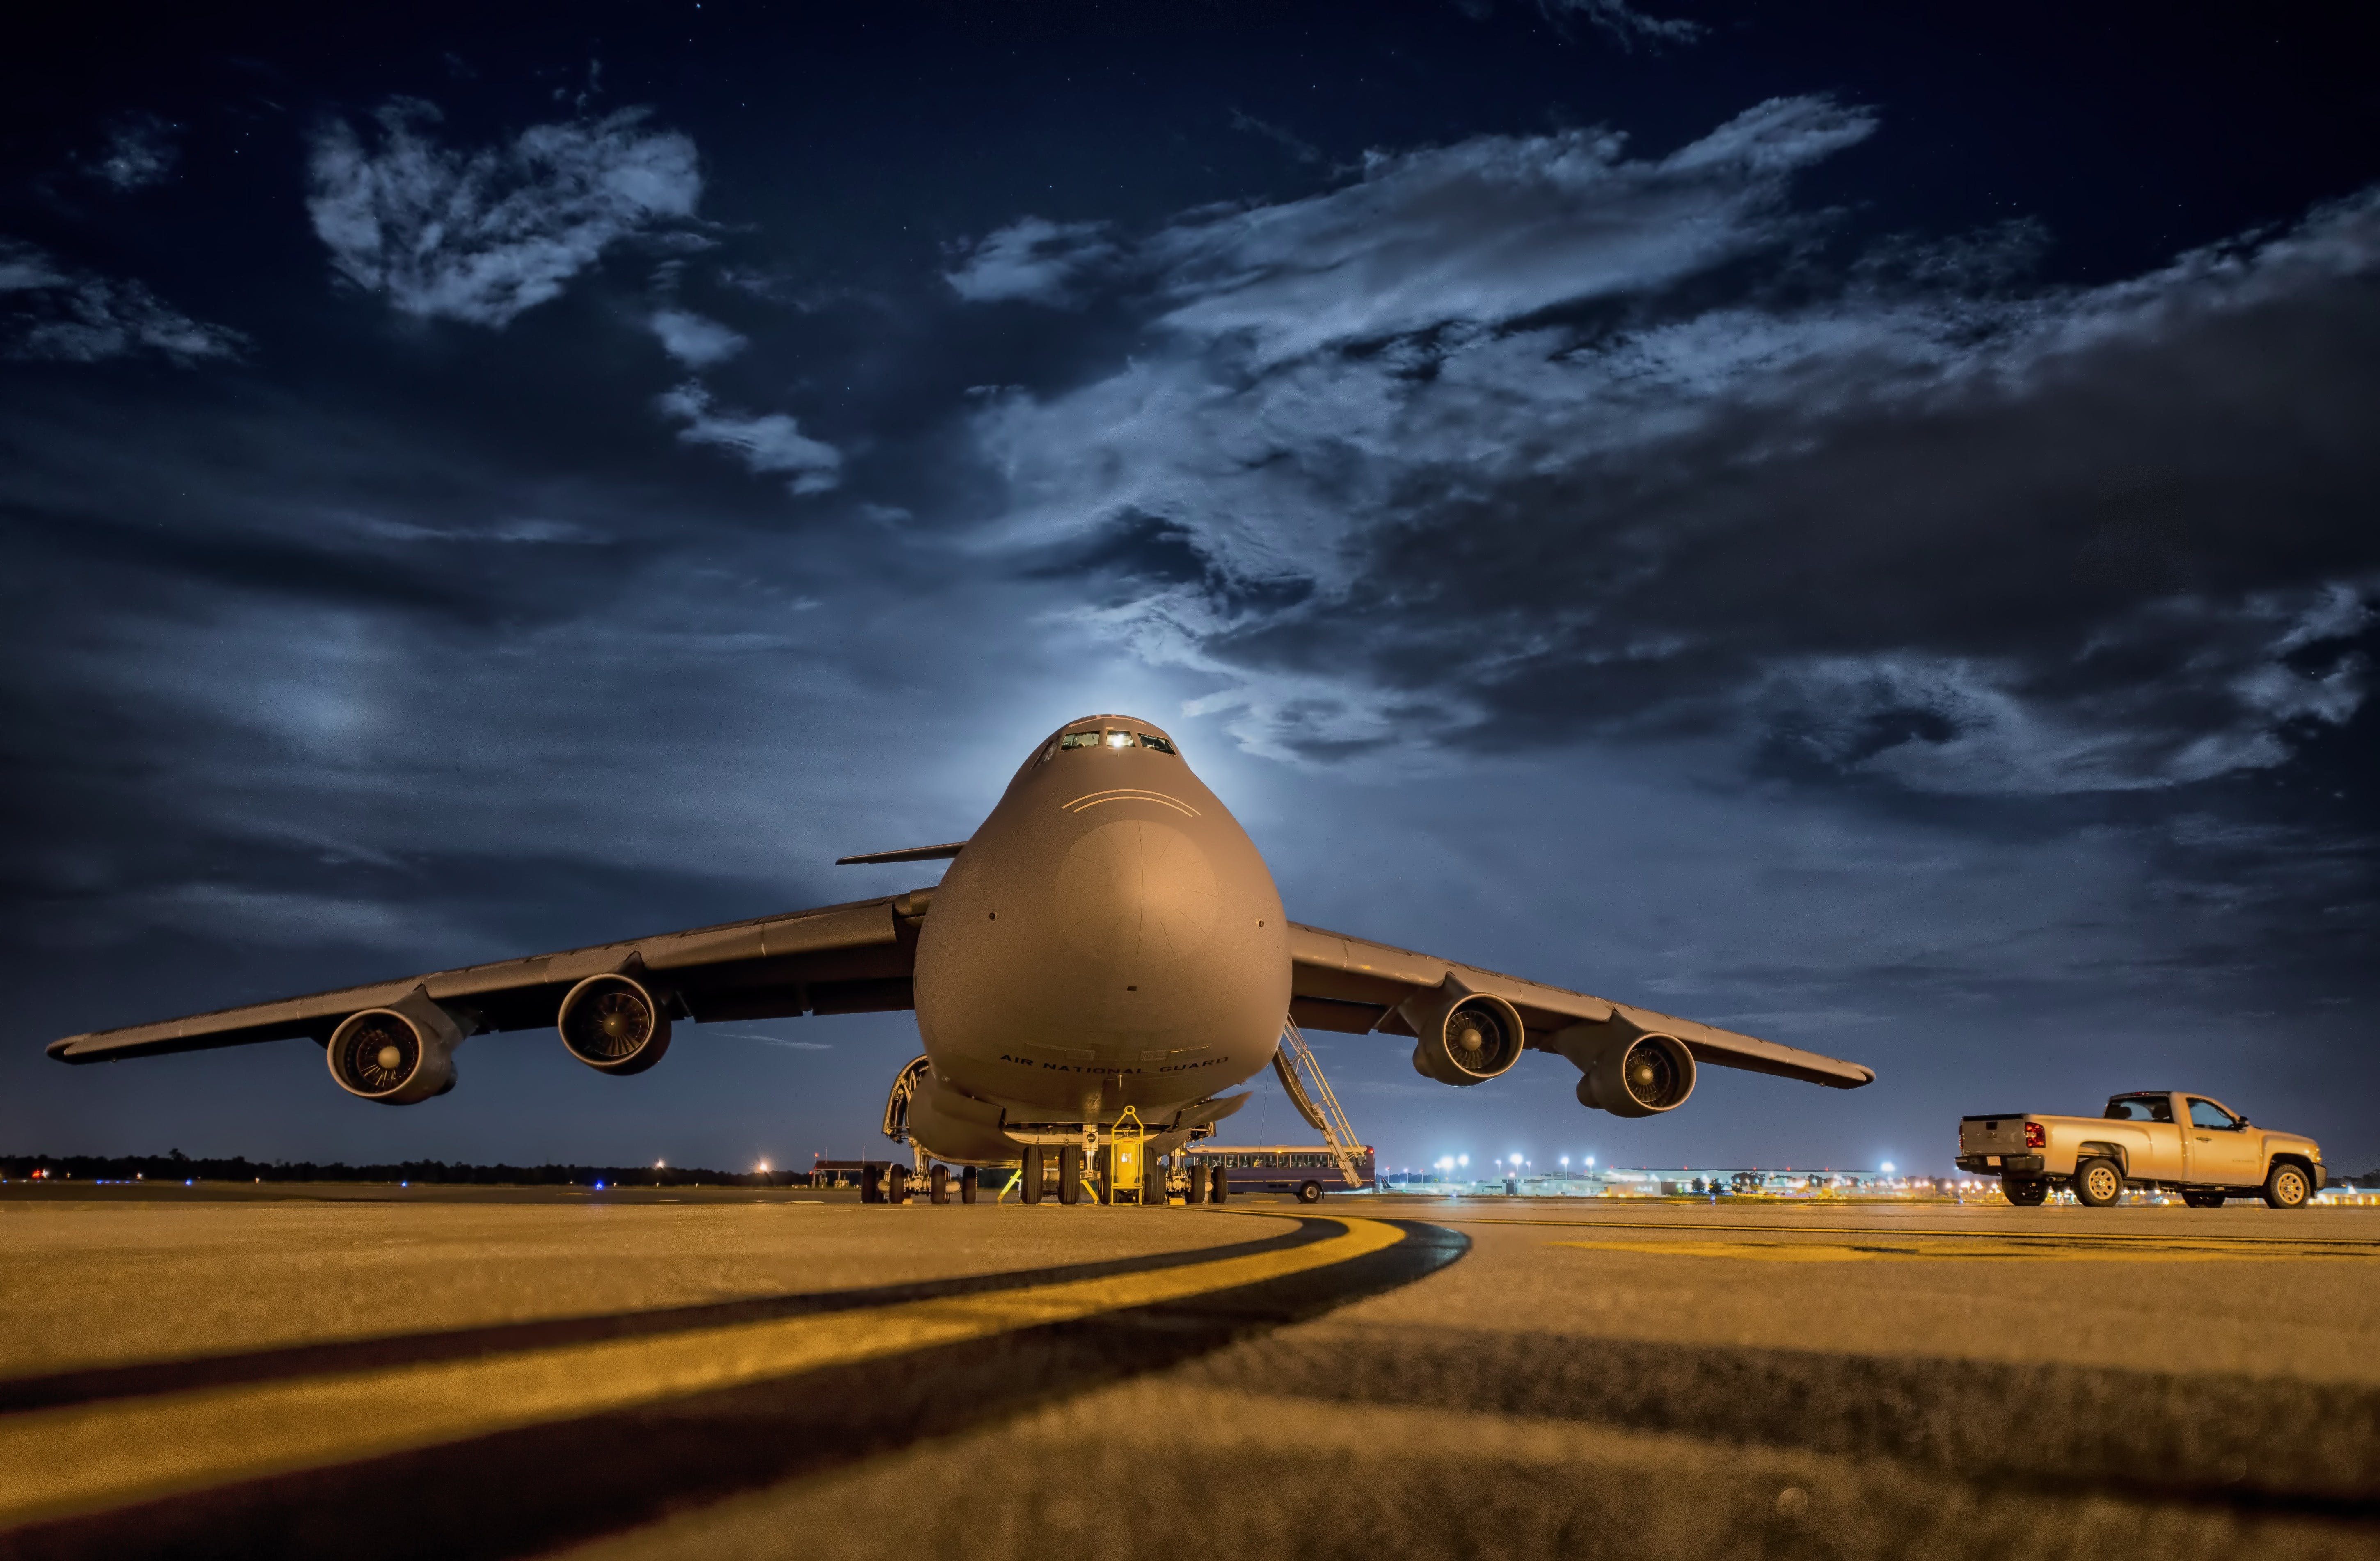 Airport Night Photo, Download The BEST